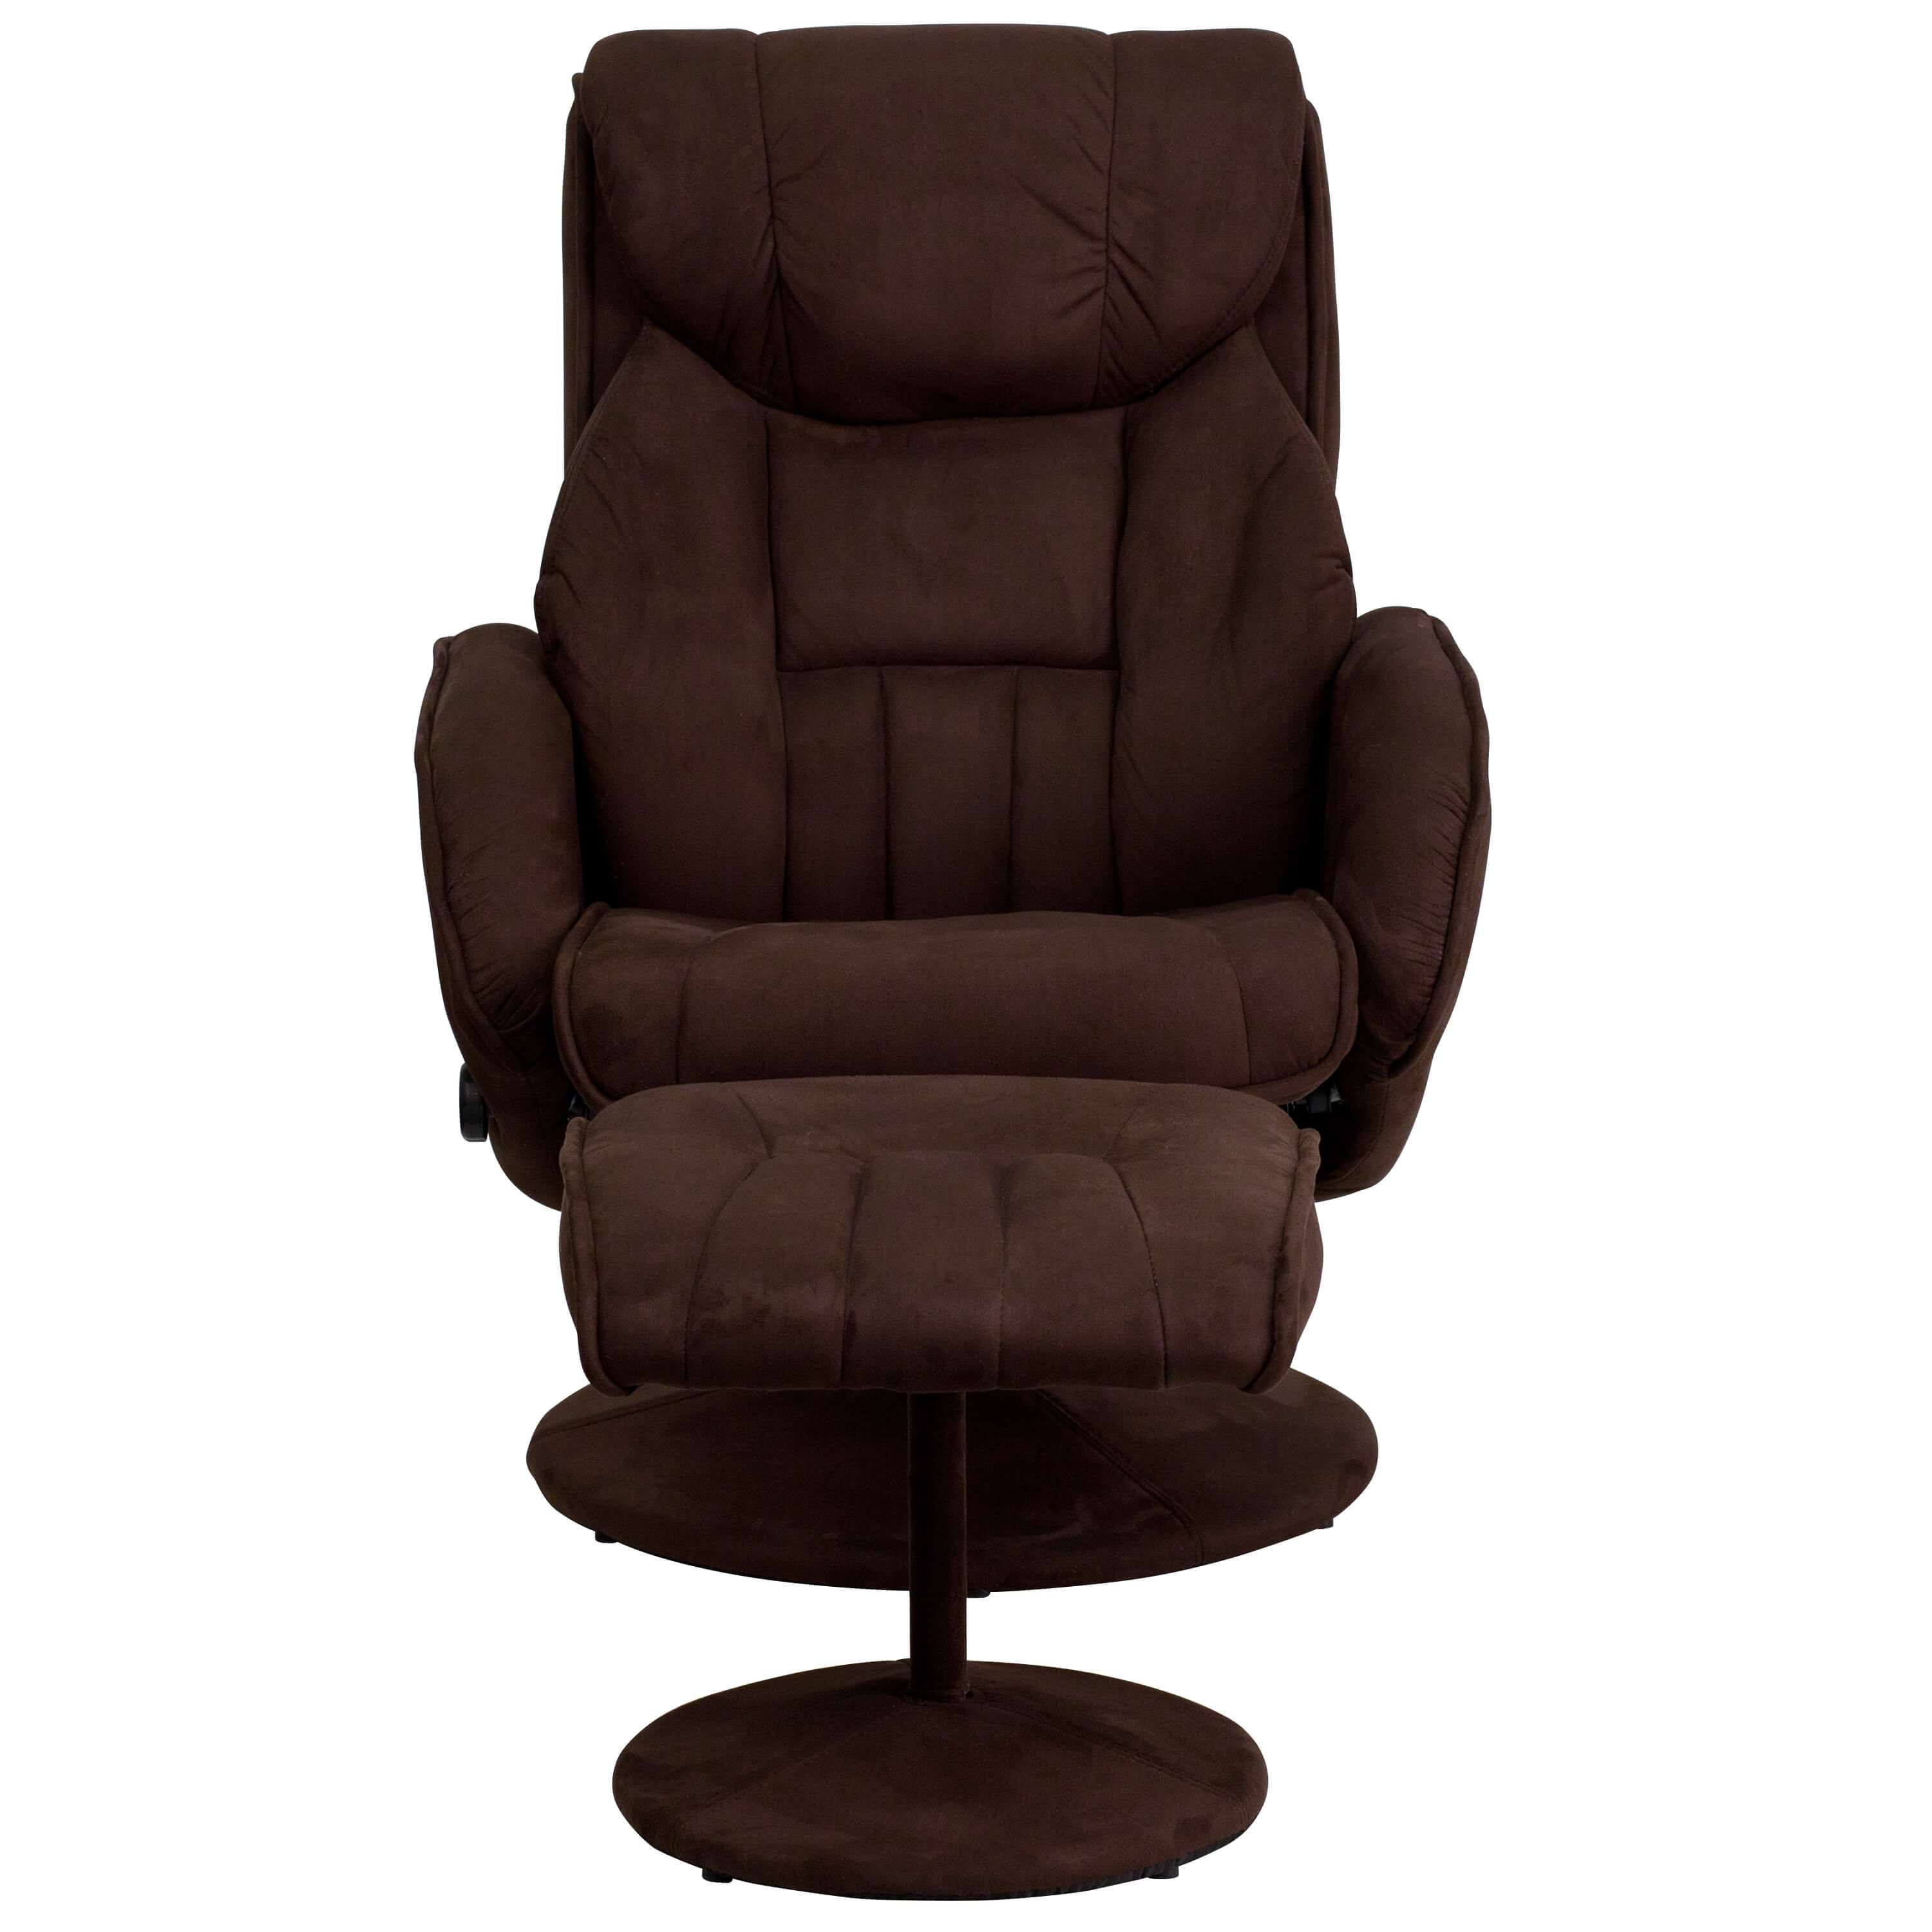 Brown recliner chair front view